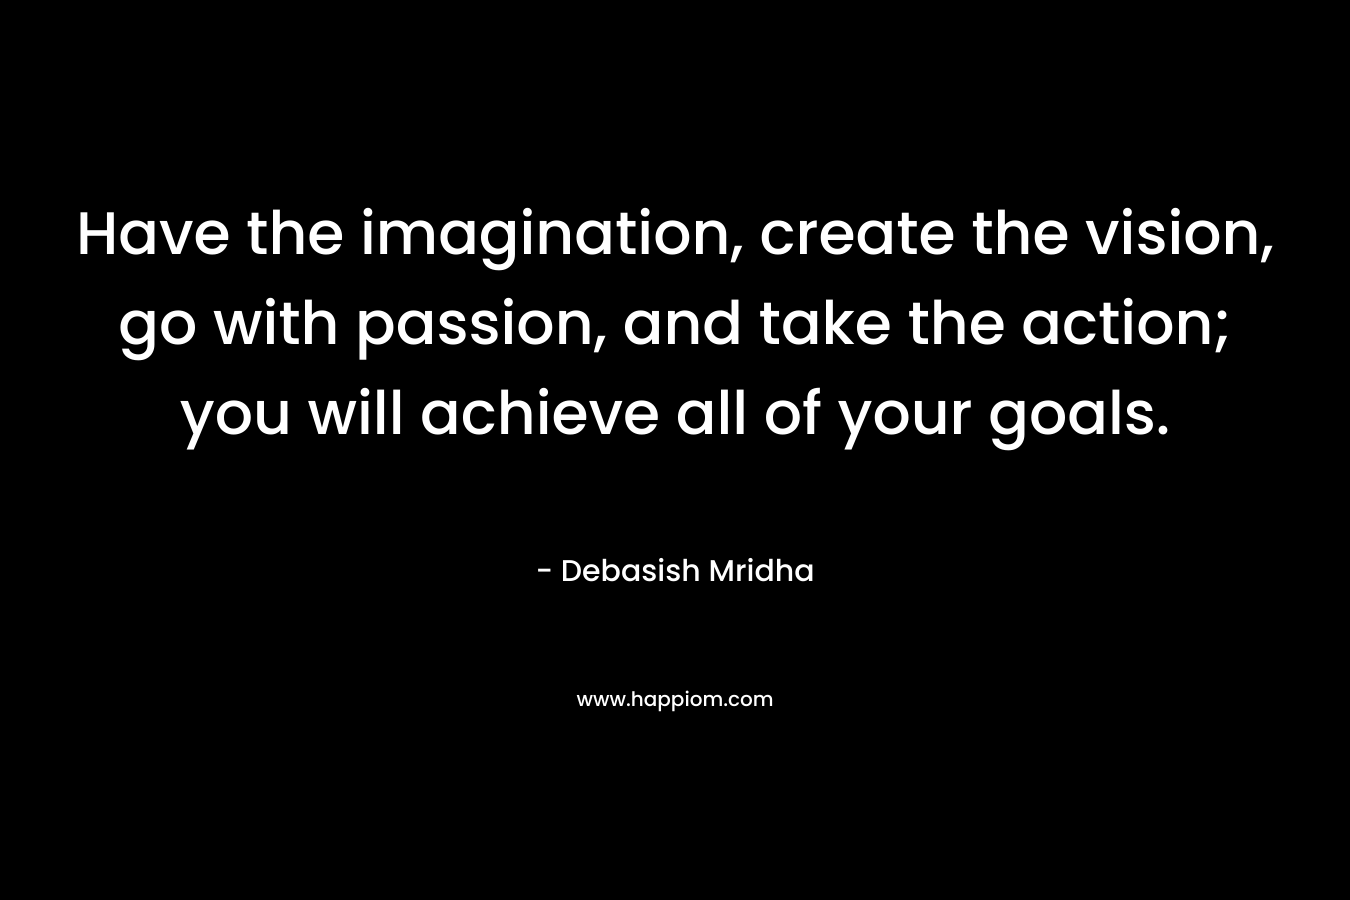 Have the imagination, create the vision, go with passion, and take the action; you will achieve all of your goals.